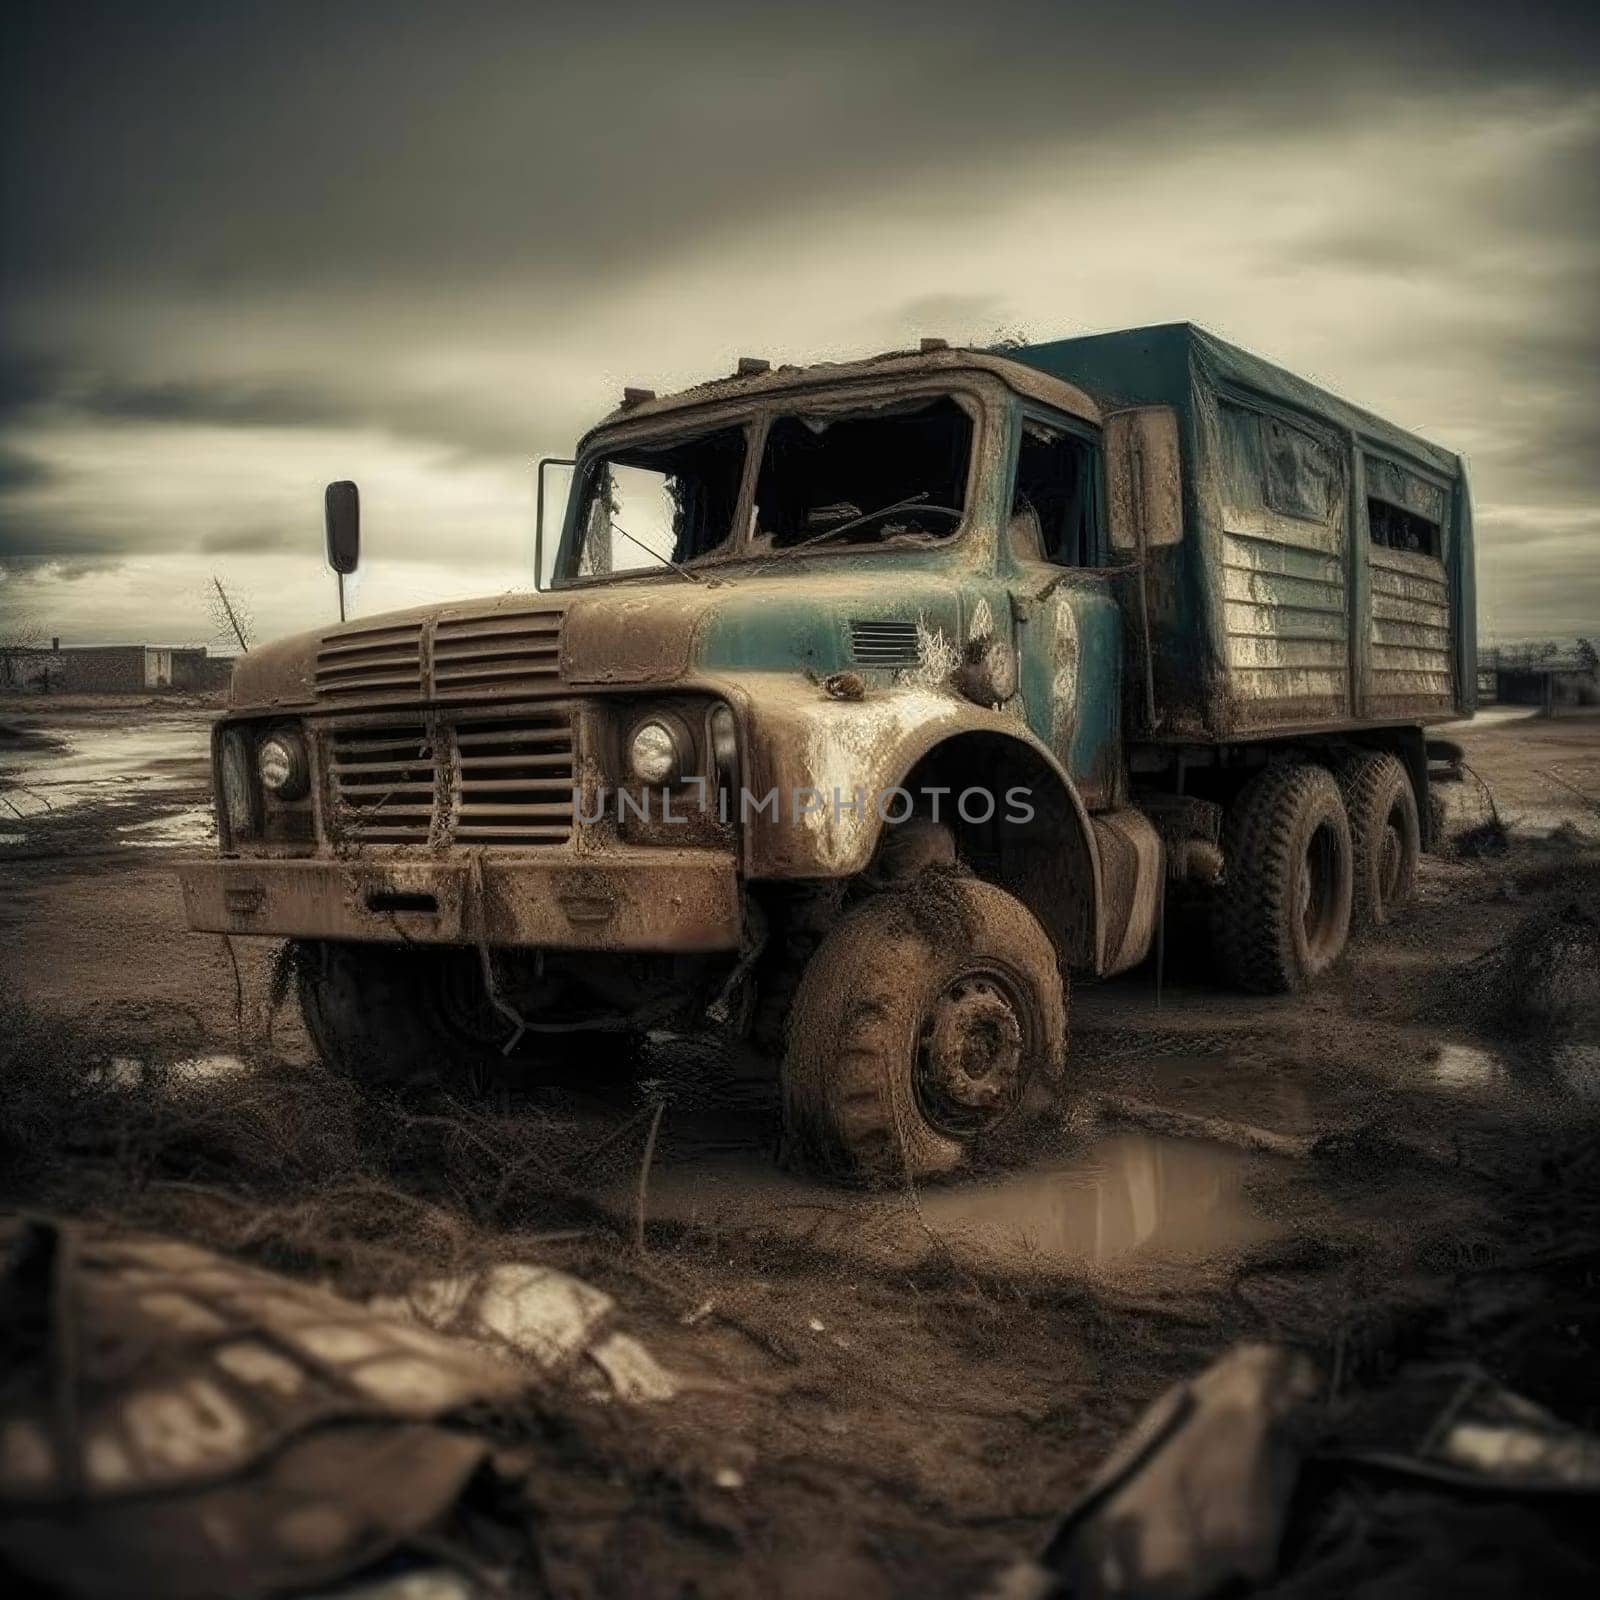 Old truck in the mud - photo in old color image style (ID: 001667)